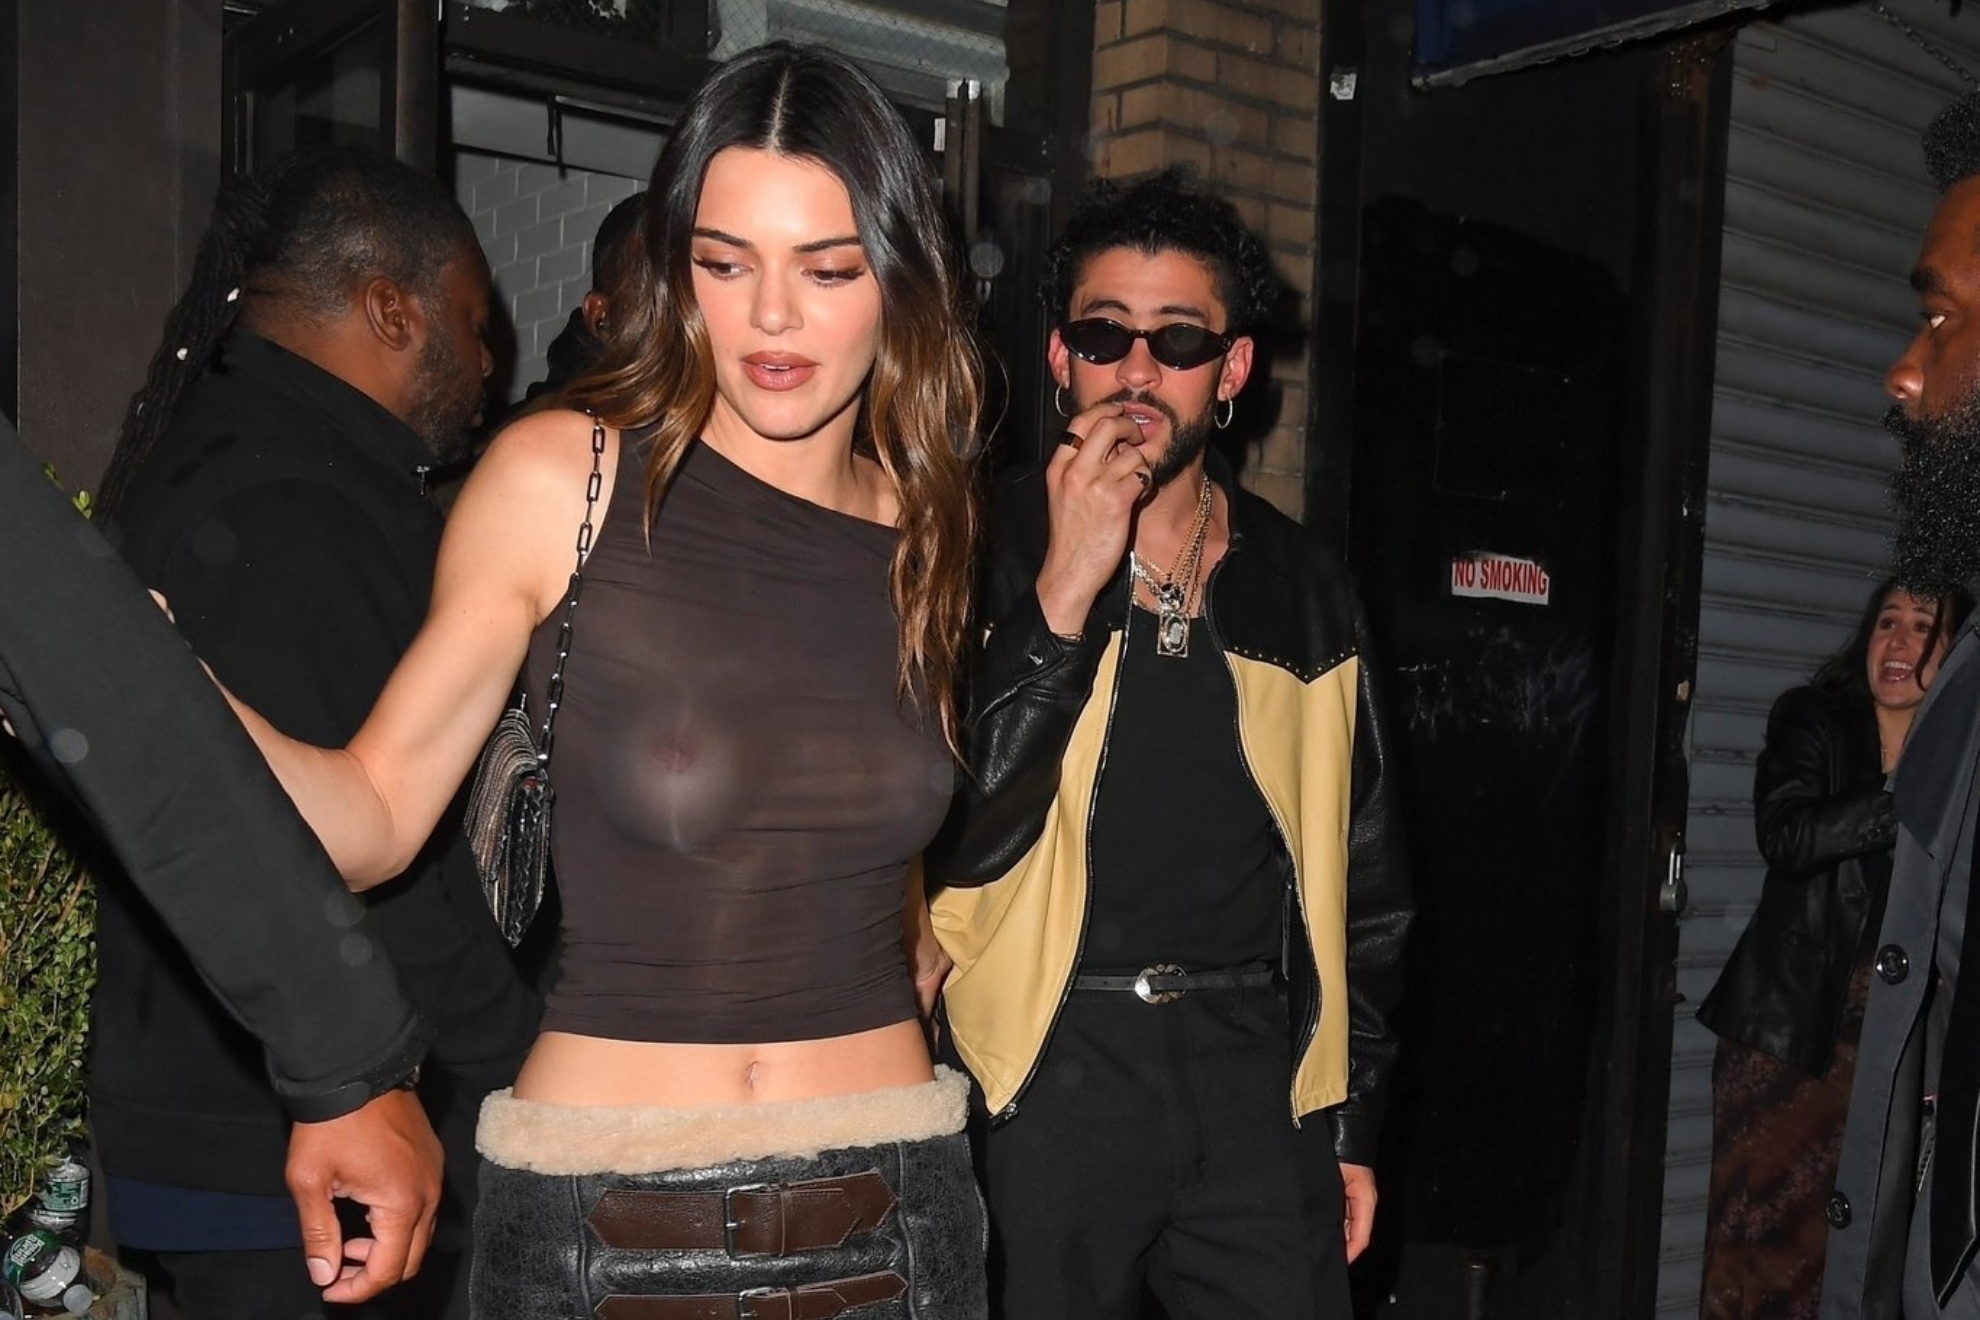 alice espina recommends See Thru Tops In Public